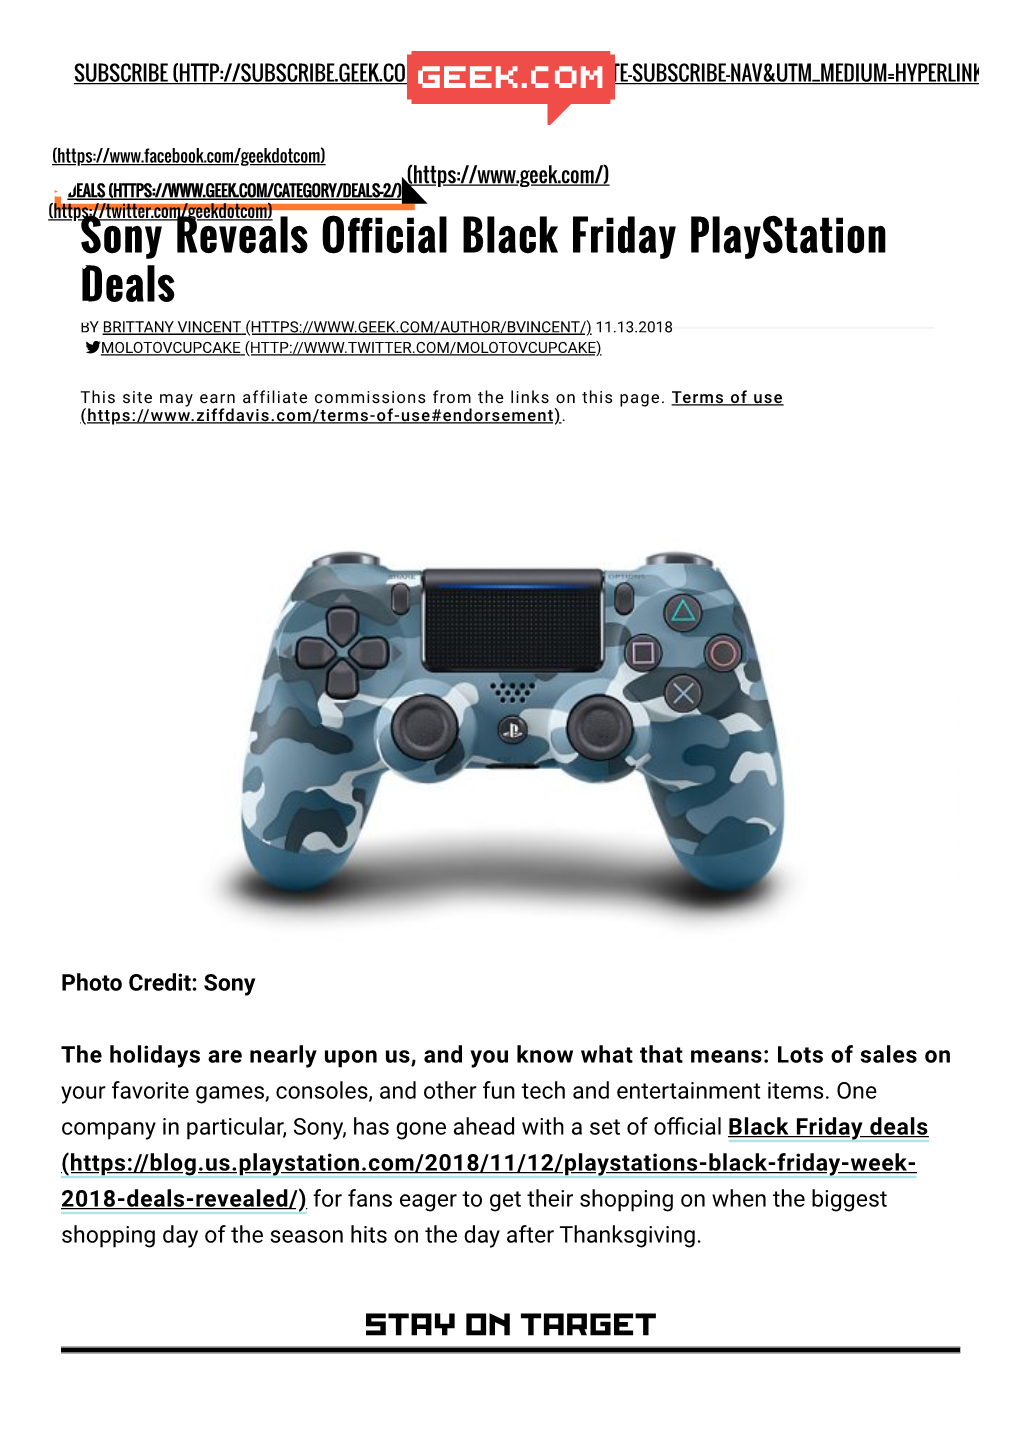 Sony Reveals Official Black Friday Playstation Deals